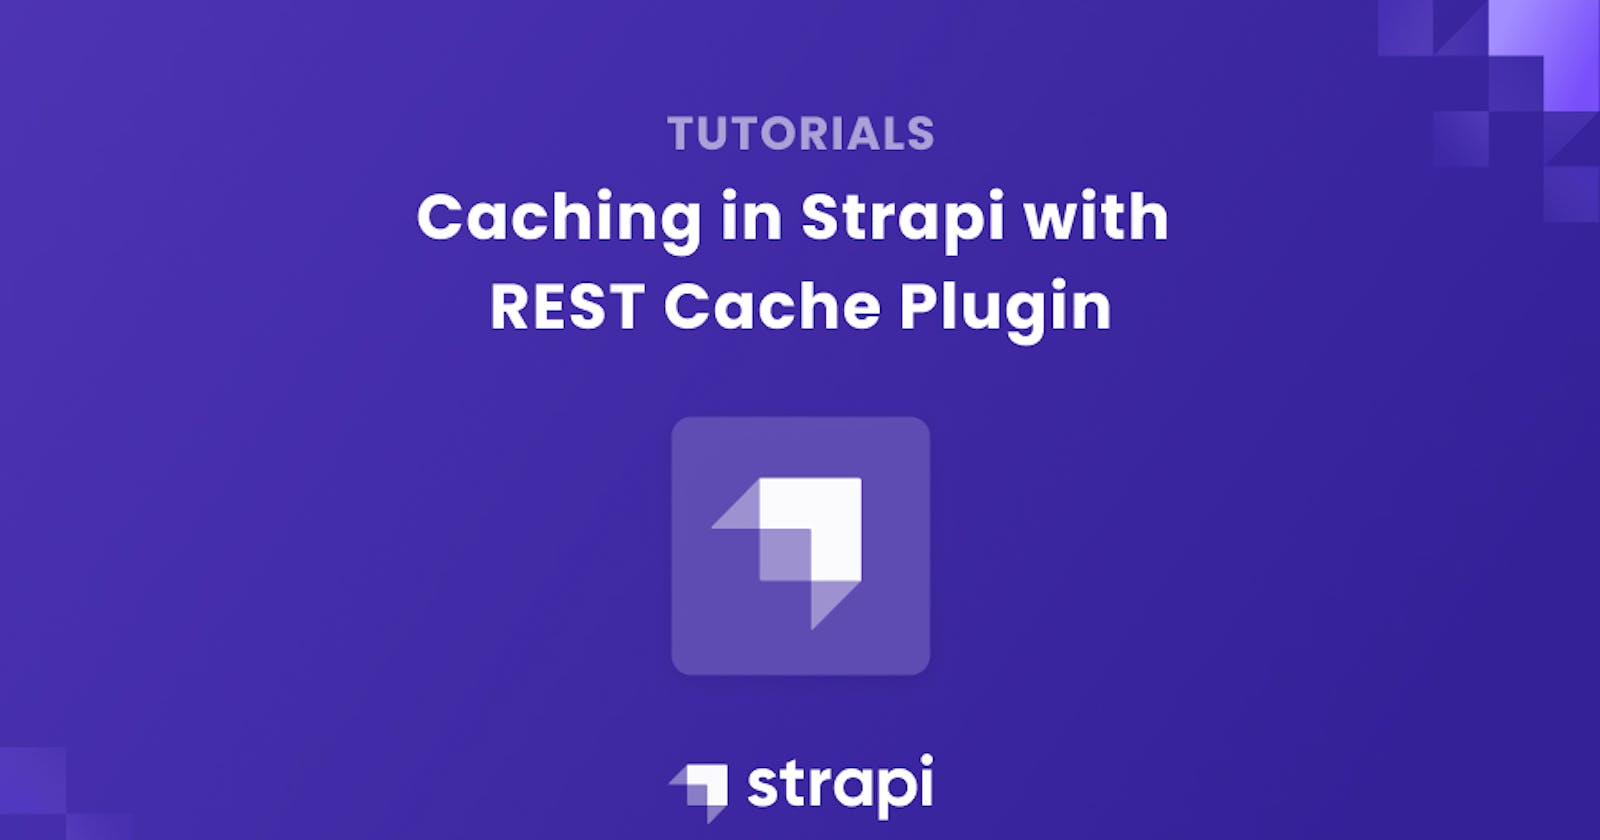 Caching in Strapi with REST Cache Plugin